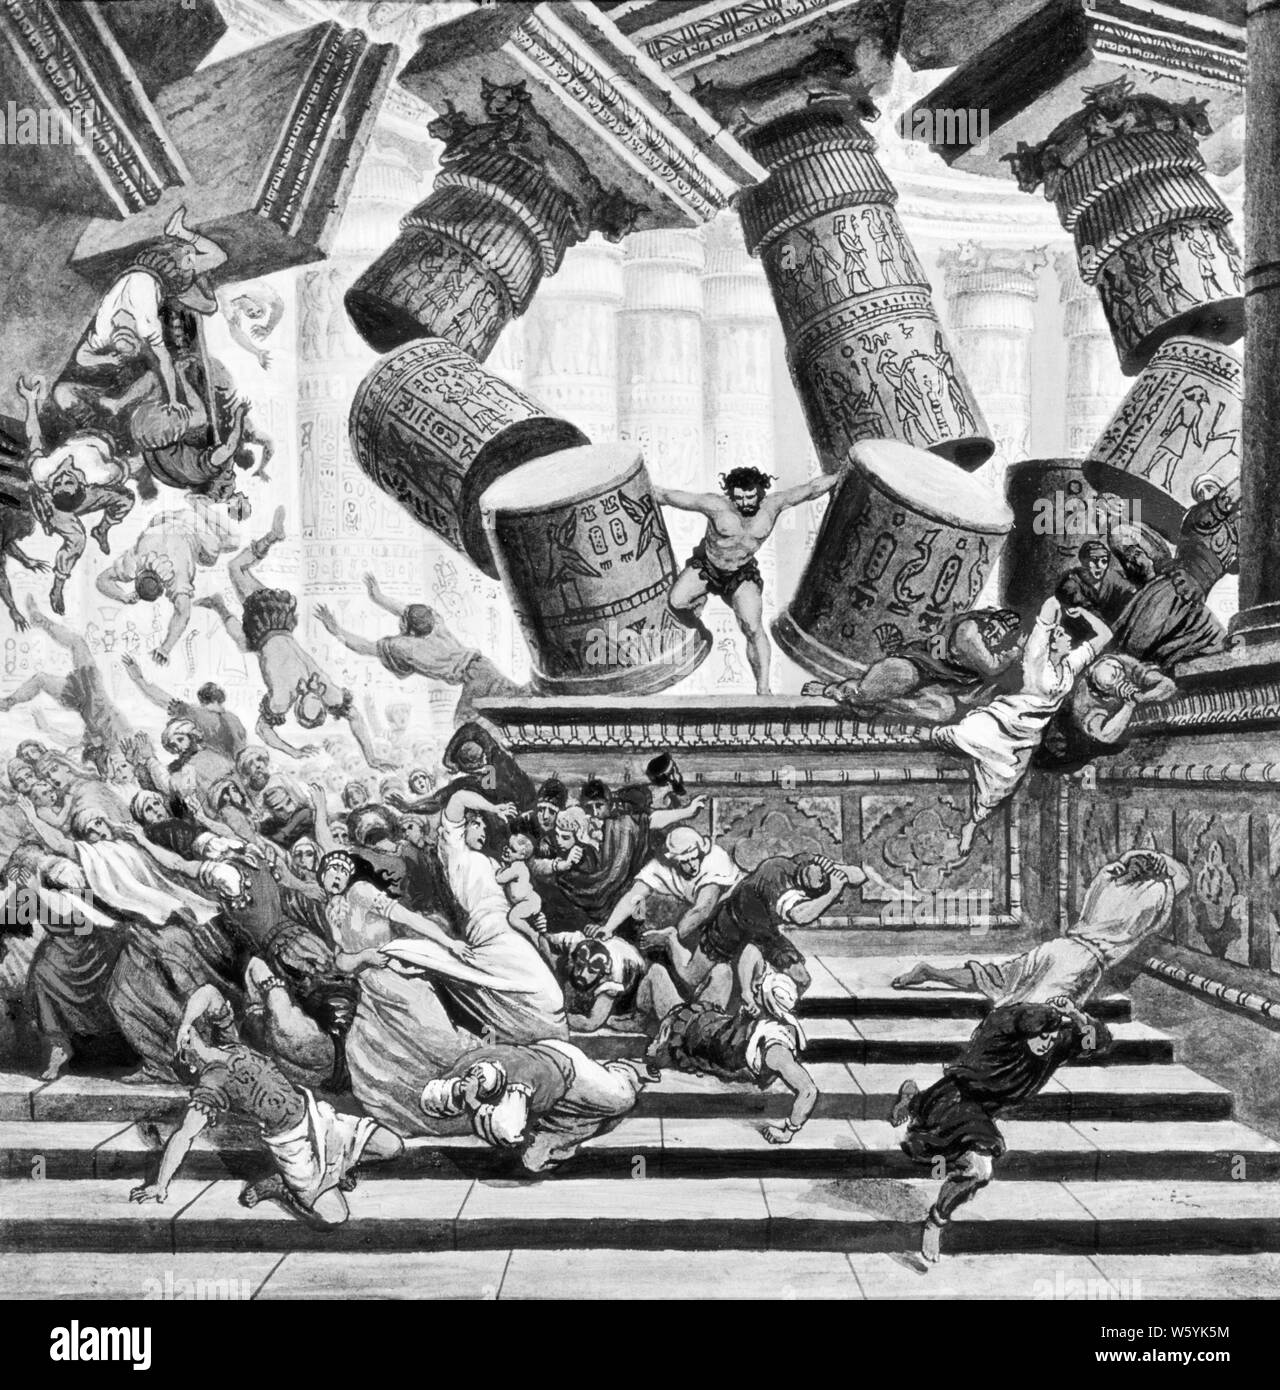 ILLUSTRATION OF BIBLICAL SAMSON THE NAZIRITE DESTROYING THE PHILISTINES’ TEMPLE OF DAGON  - a5833 SPL001 HARS MID-ADULT MAN RESTORED BIBLICAL BLACK AND WHITE DESTROYS OLD FASHIONED OLD TESTAMENT Stock Photo